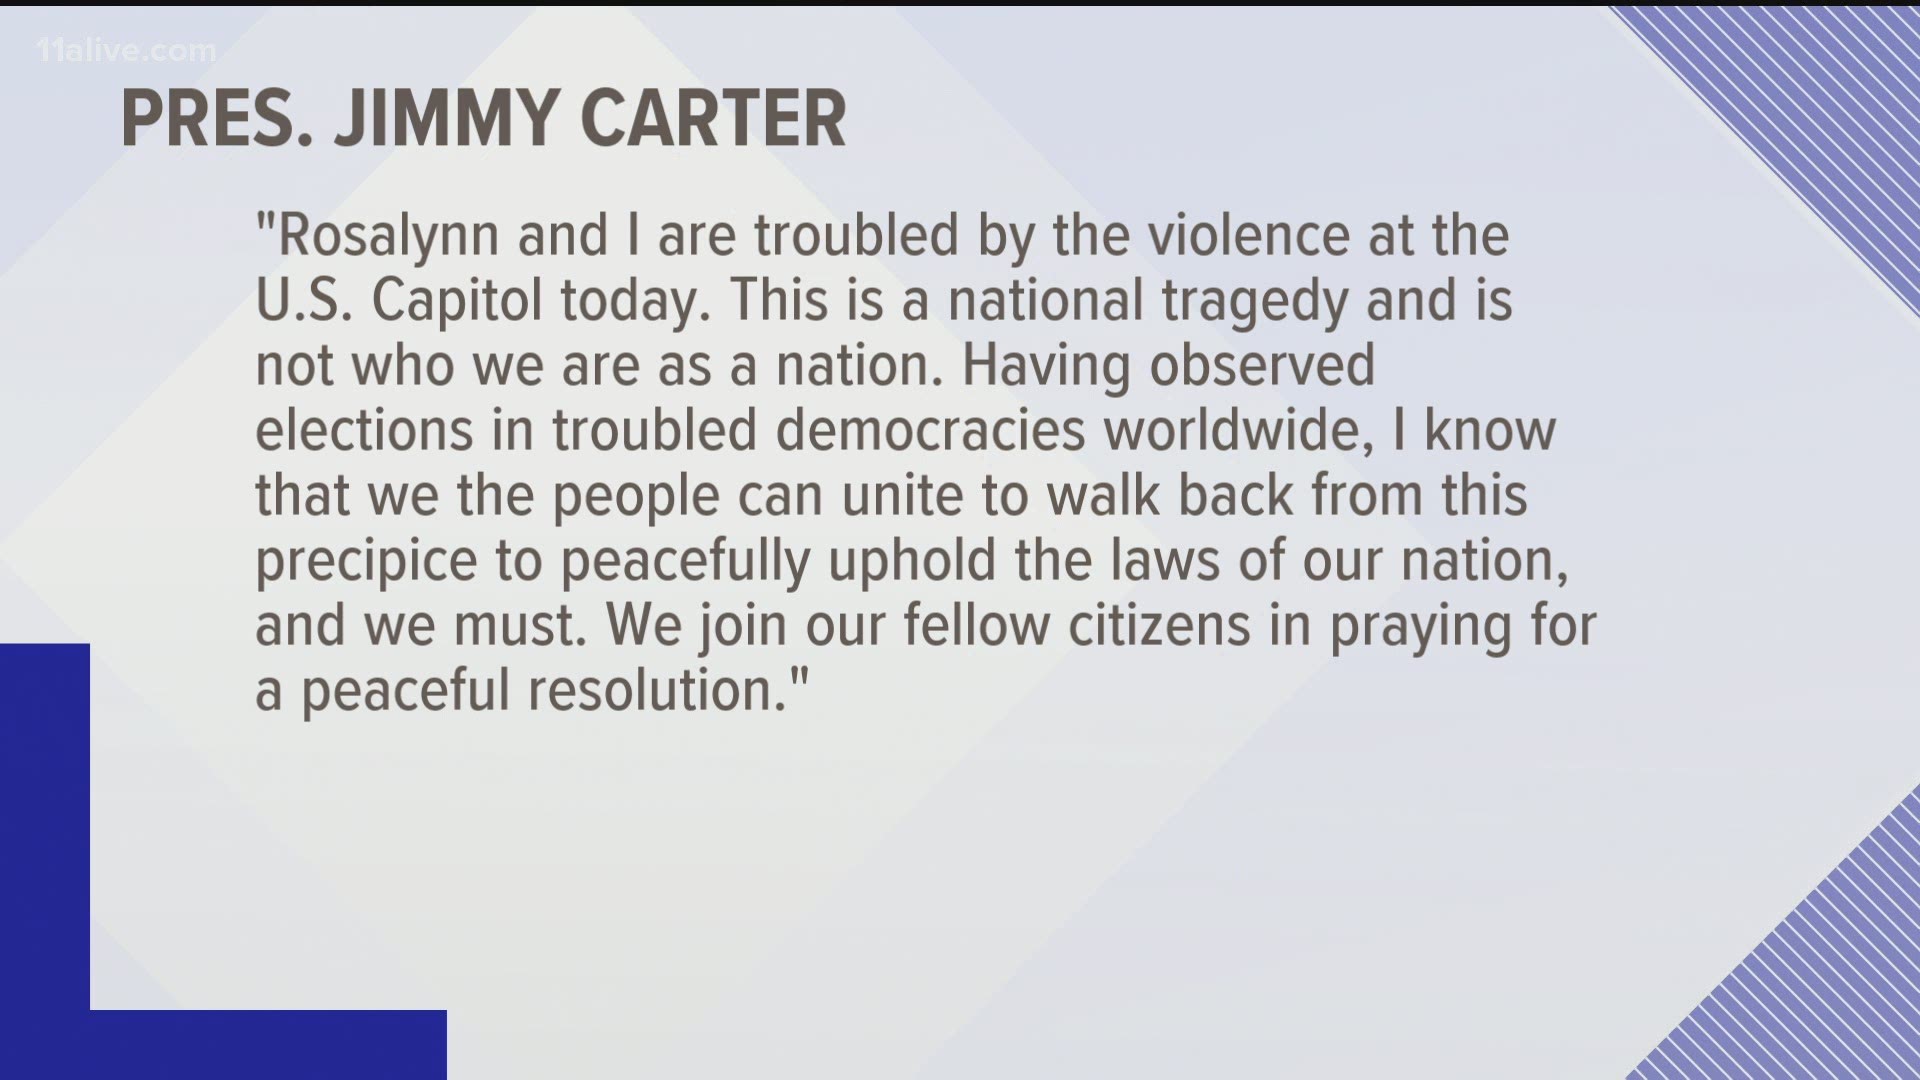 Carter released a statement Wednesday evening about the violence